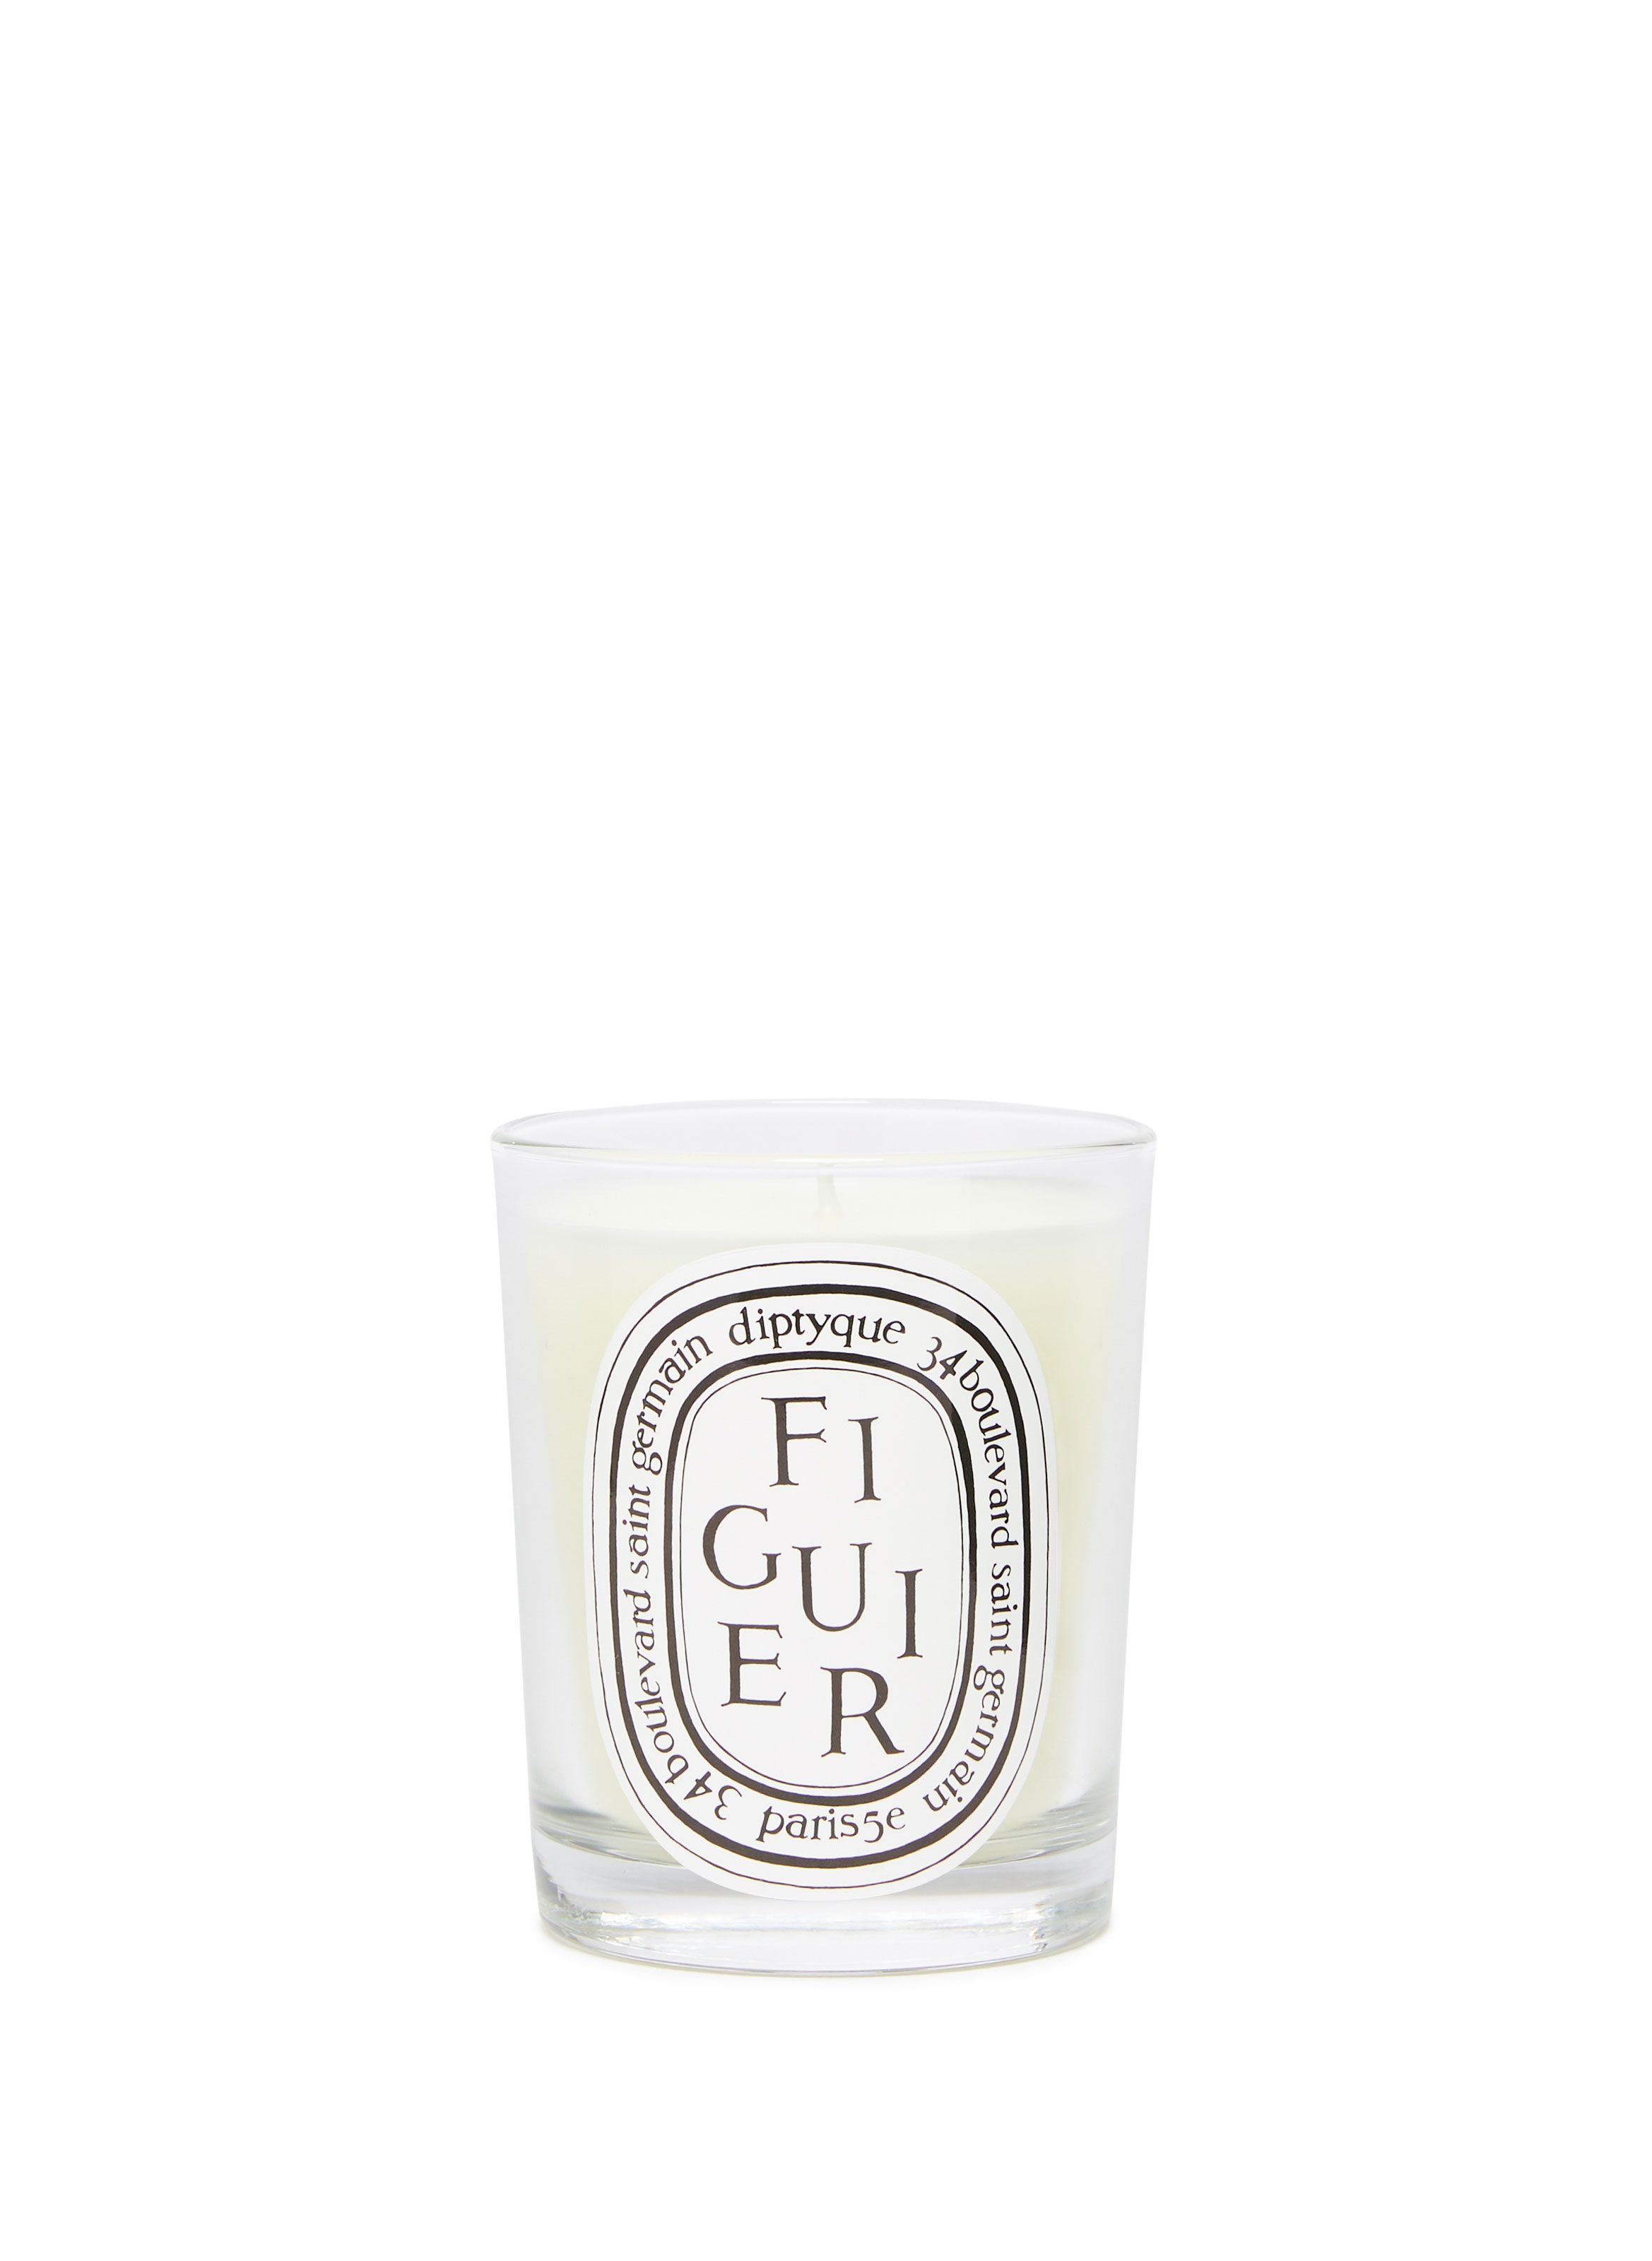 DIPTYQUE FRANCE SET LARGE 6,5 Oz 190 g FIG TREE CANDLE & FIGUIER OVAL SCENT 